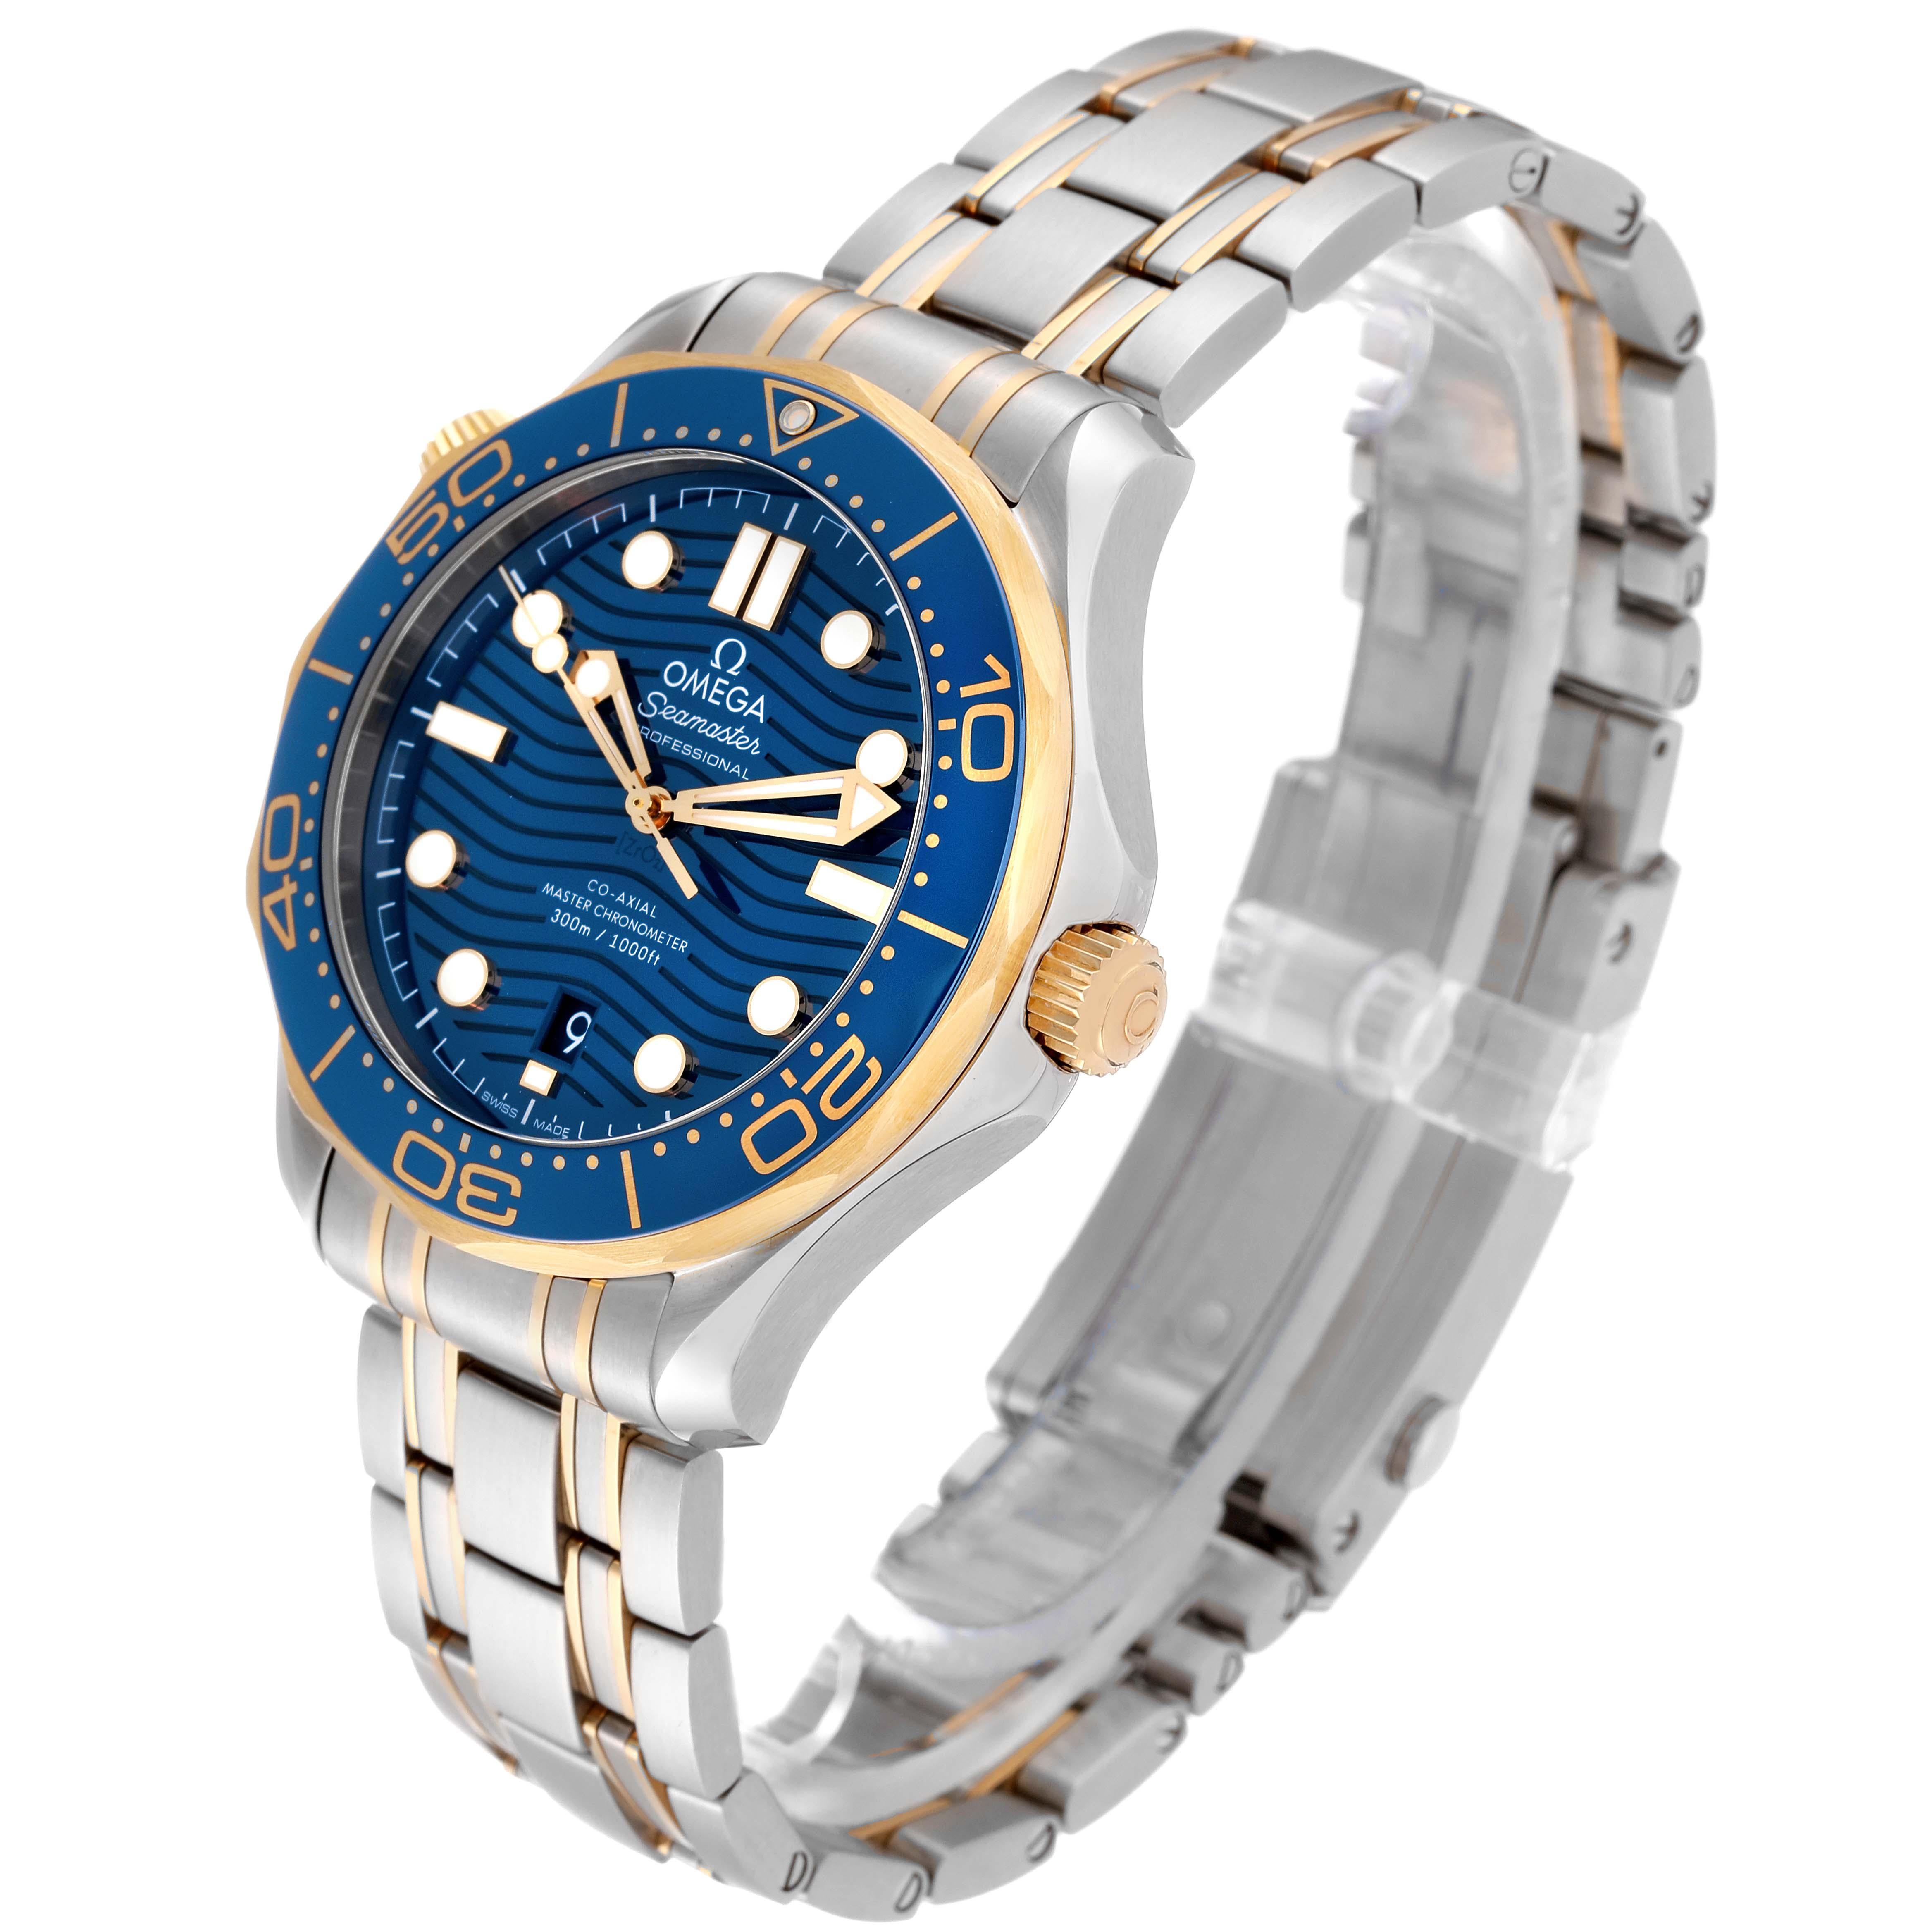 Omega Seamaster Diver 300M Steel Yellow Gold Watch 210.20.42.20.03.001 Unworn For Sale 4